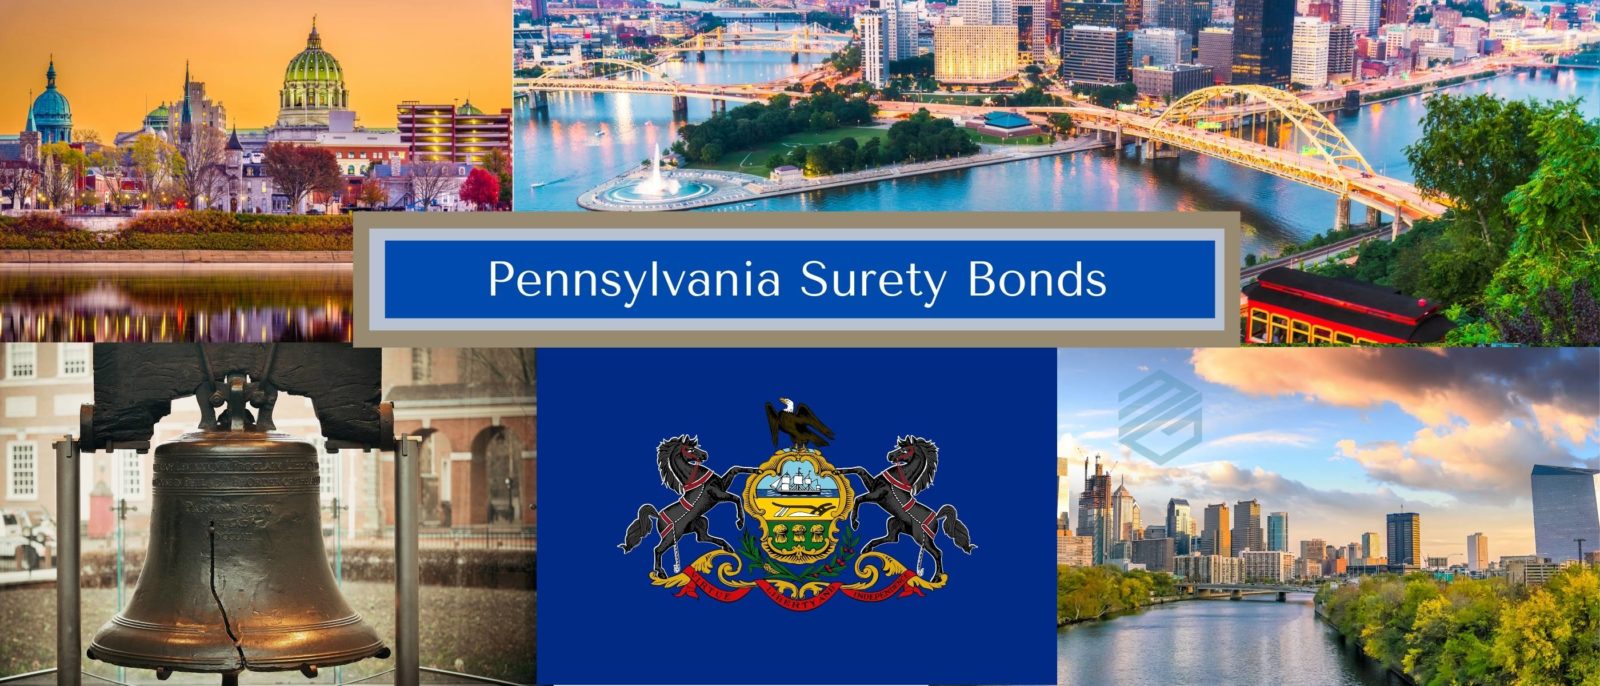 Pennsylvania Surety Bonds - Five pictures representing Pennsylvania including the state flag, Pittsburg, Philadelphia, Harrisburg and the Liberty Bell. Text box reads, "Pennsylvania Surety Bonds".